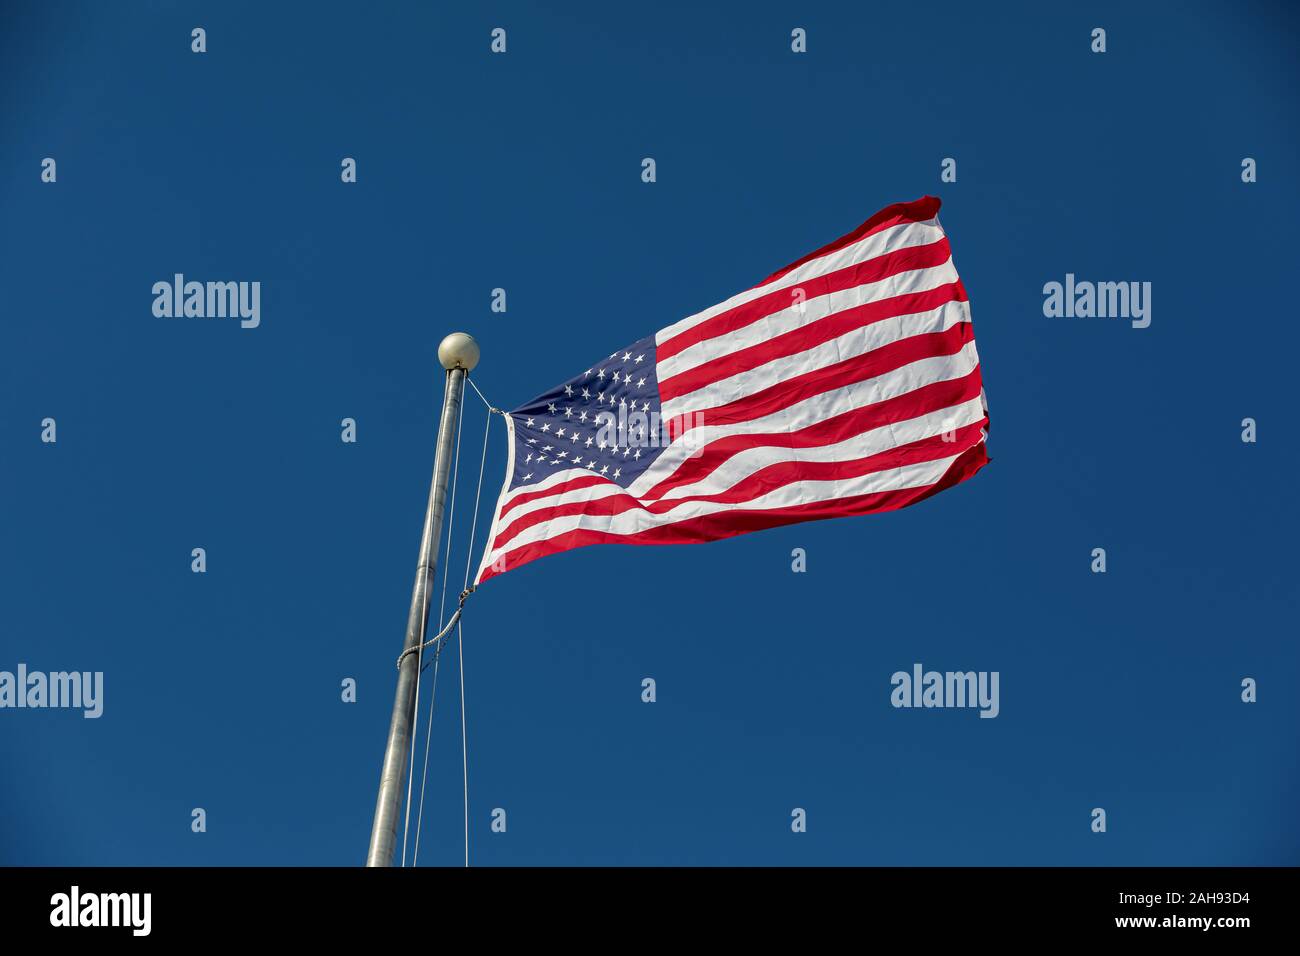 Looking up at large, new United States of America flag flying in the wind on a sunny day with deep blue sky in background Stock Photo